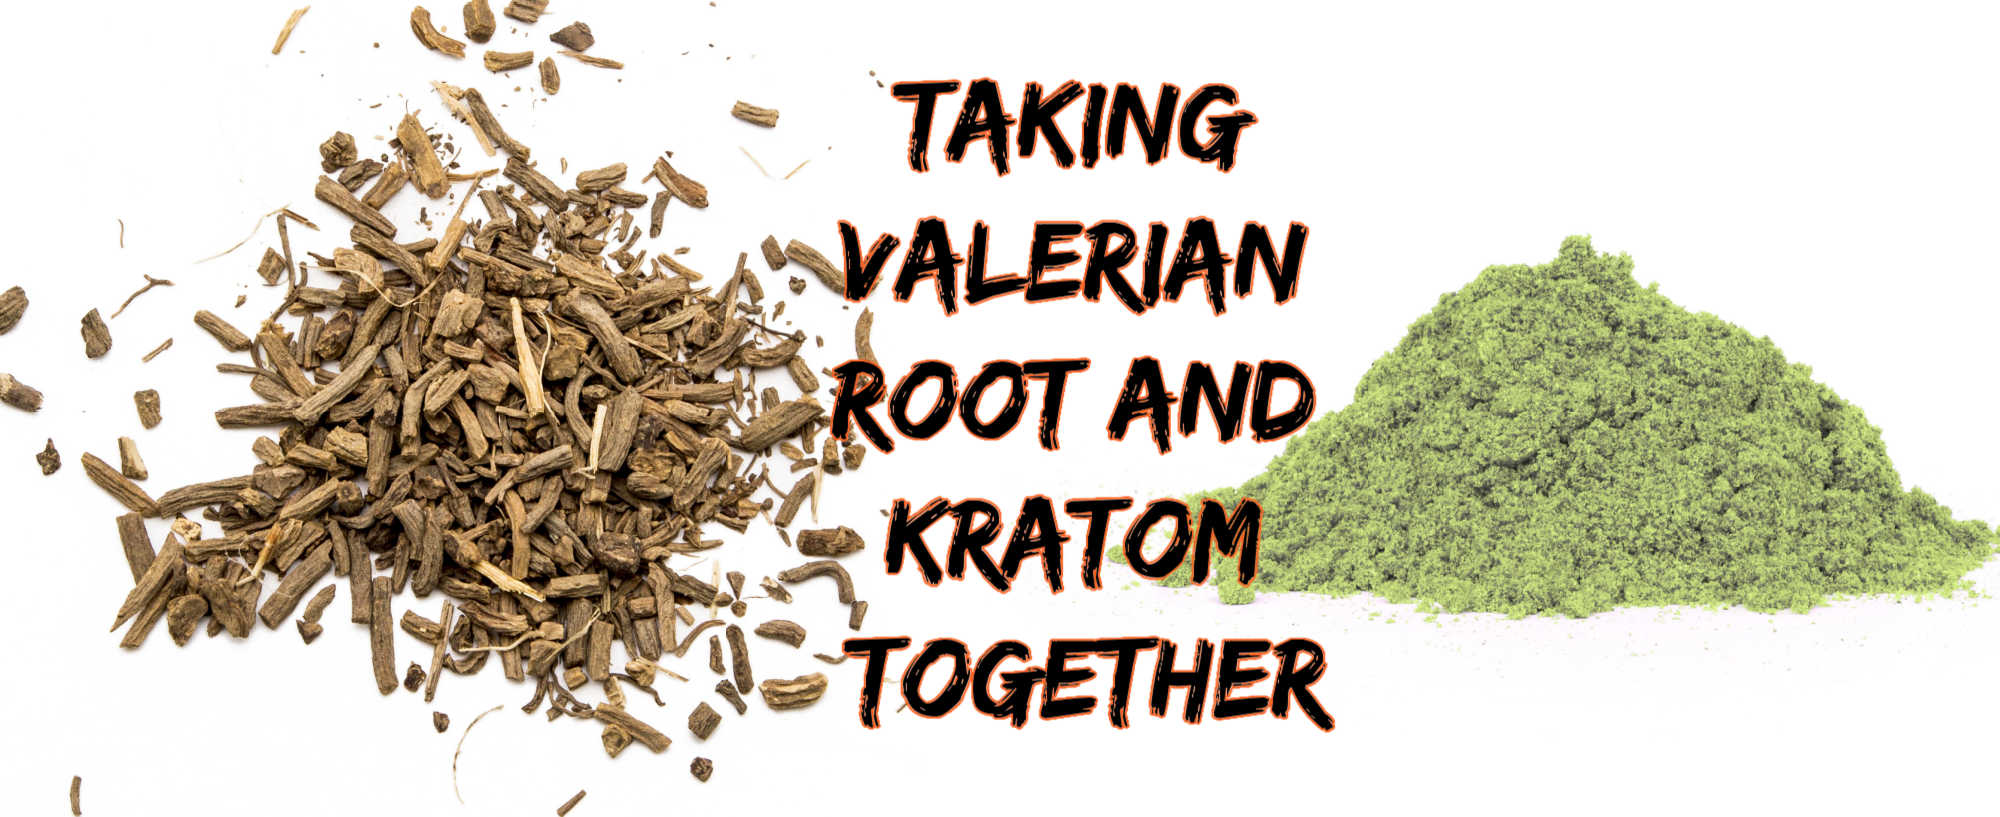 image of taking valerian root and kratom together